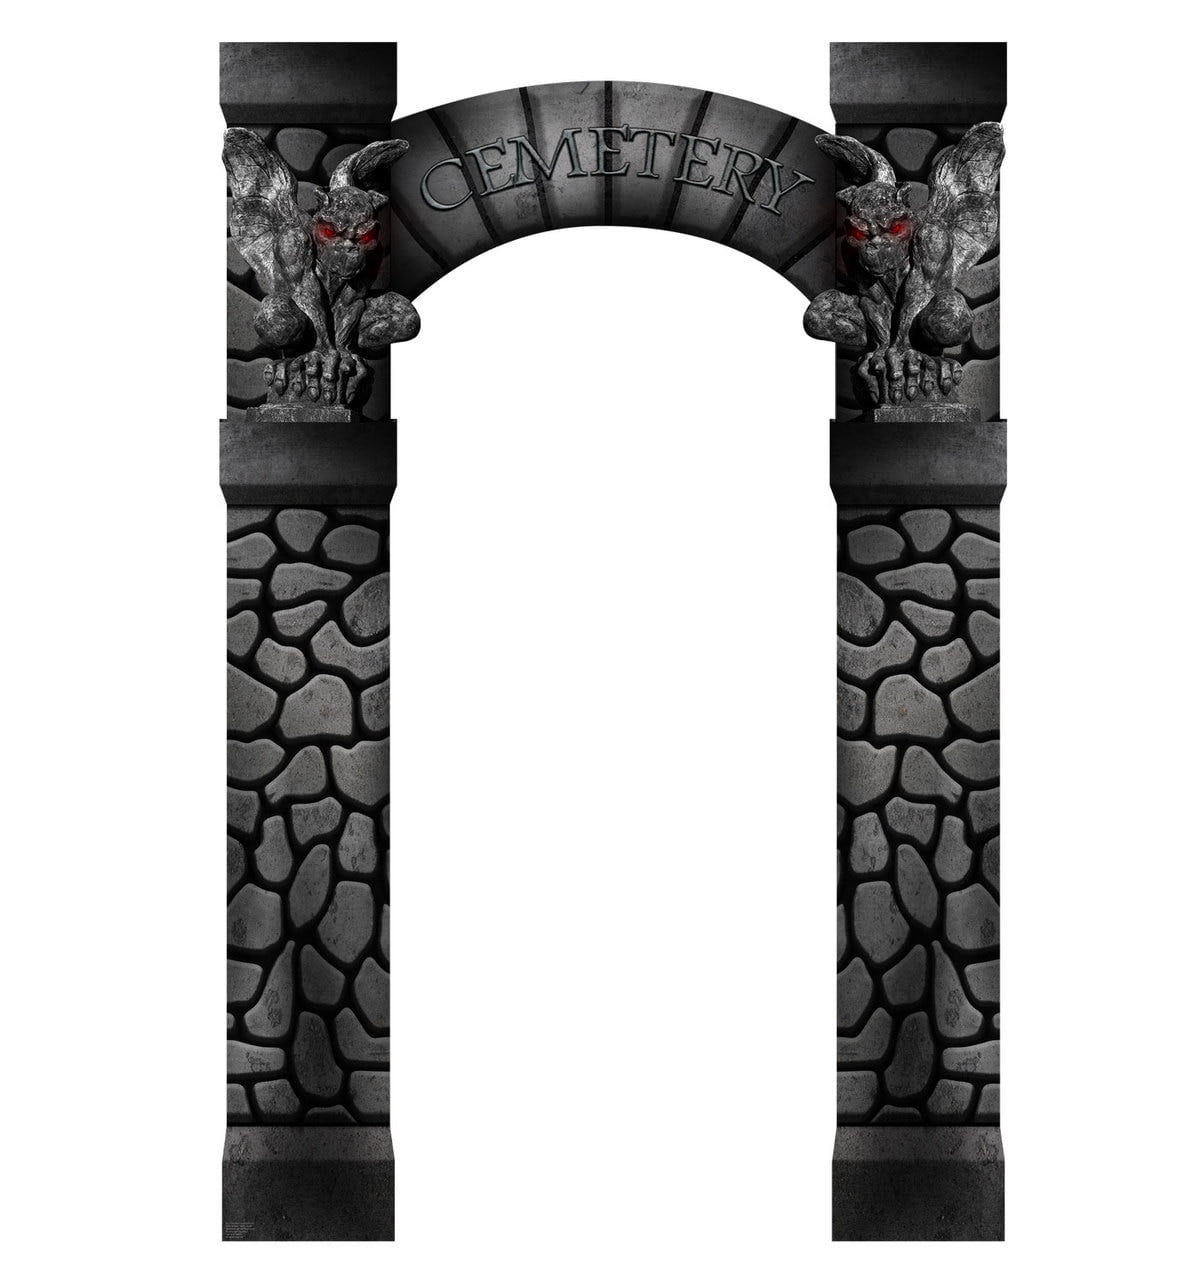 Picture of Advanced Graphics 2521 86 x 56 in. Cemetery Arch Entrance Wall Decal